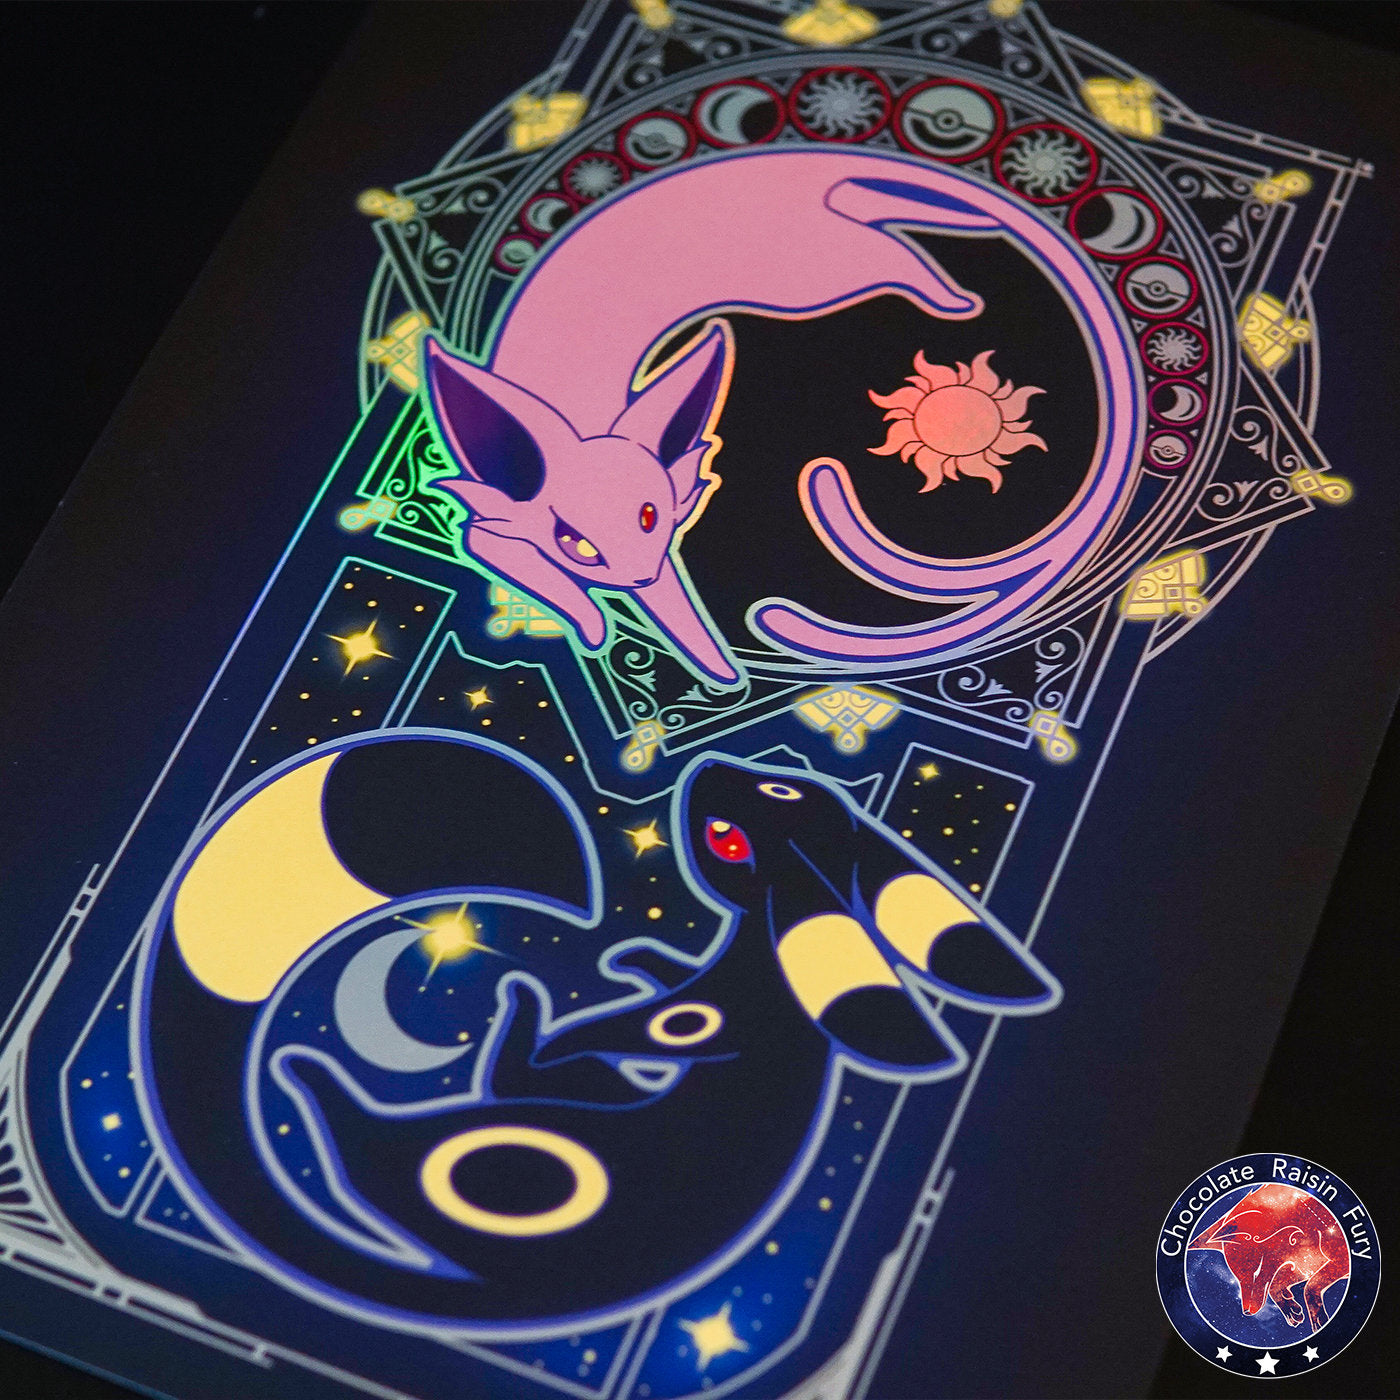 The Art of The Sun & Moon - A4 Holographic Foil Print